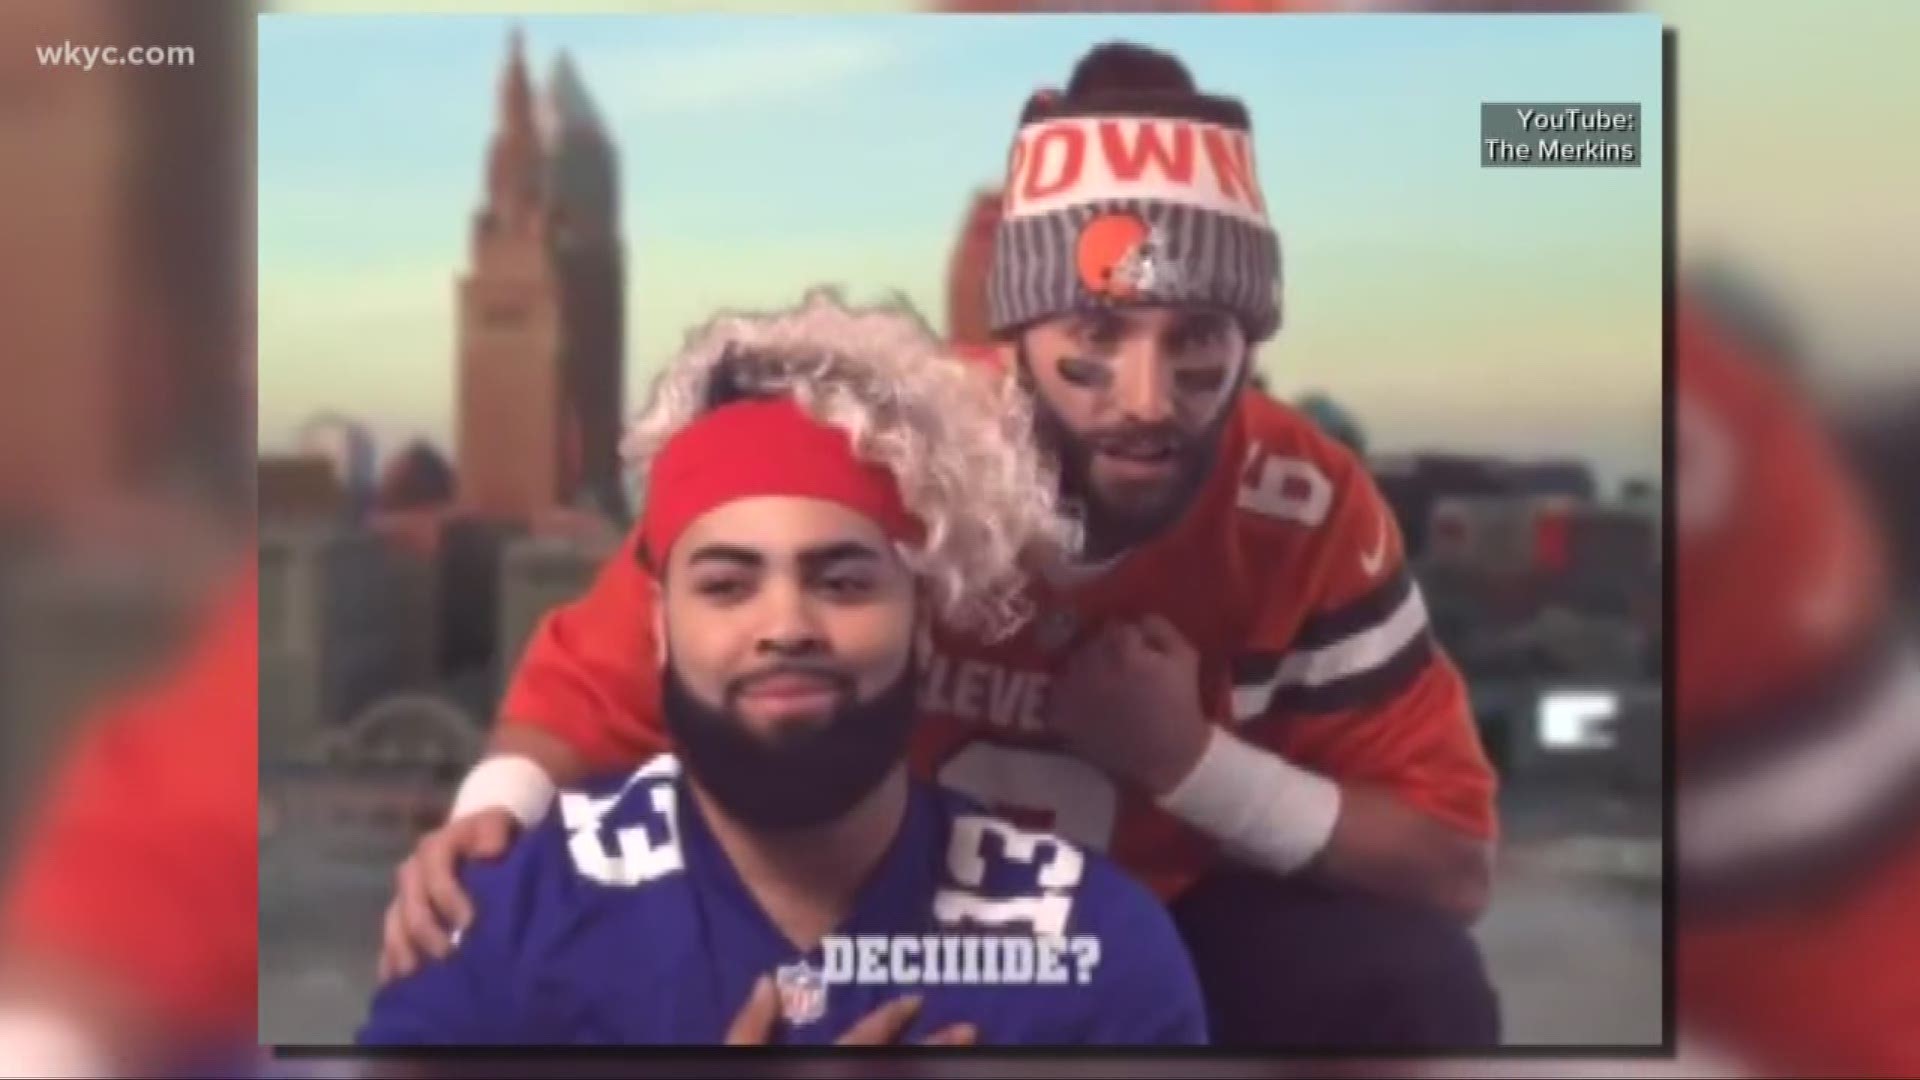 Browns take on A whole new  world in parody